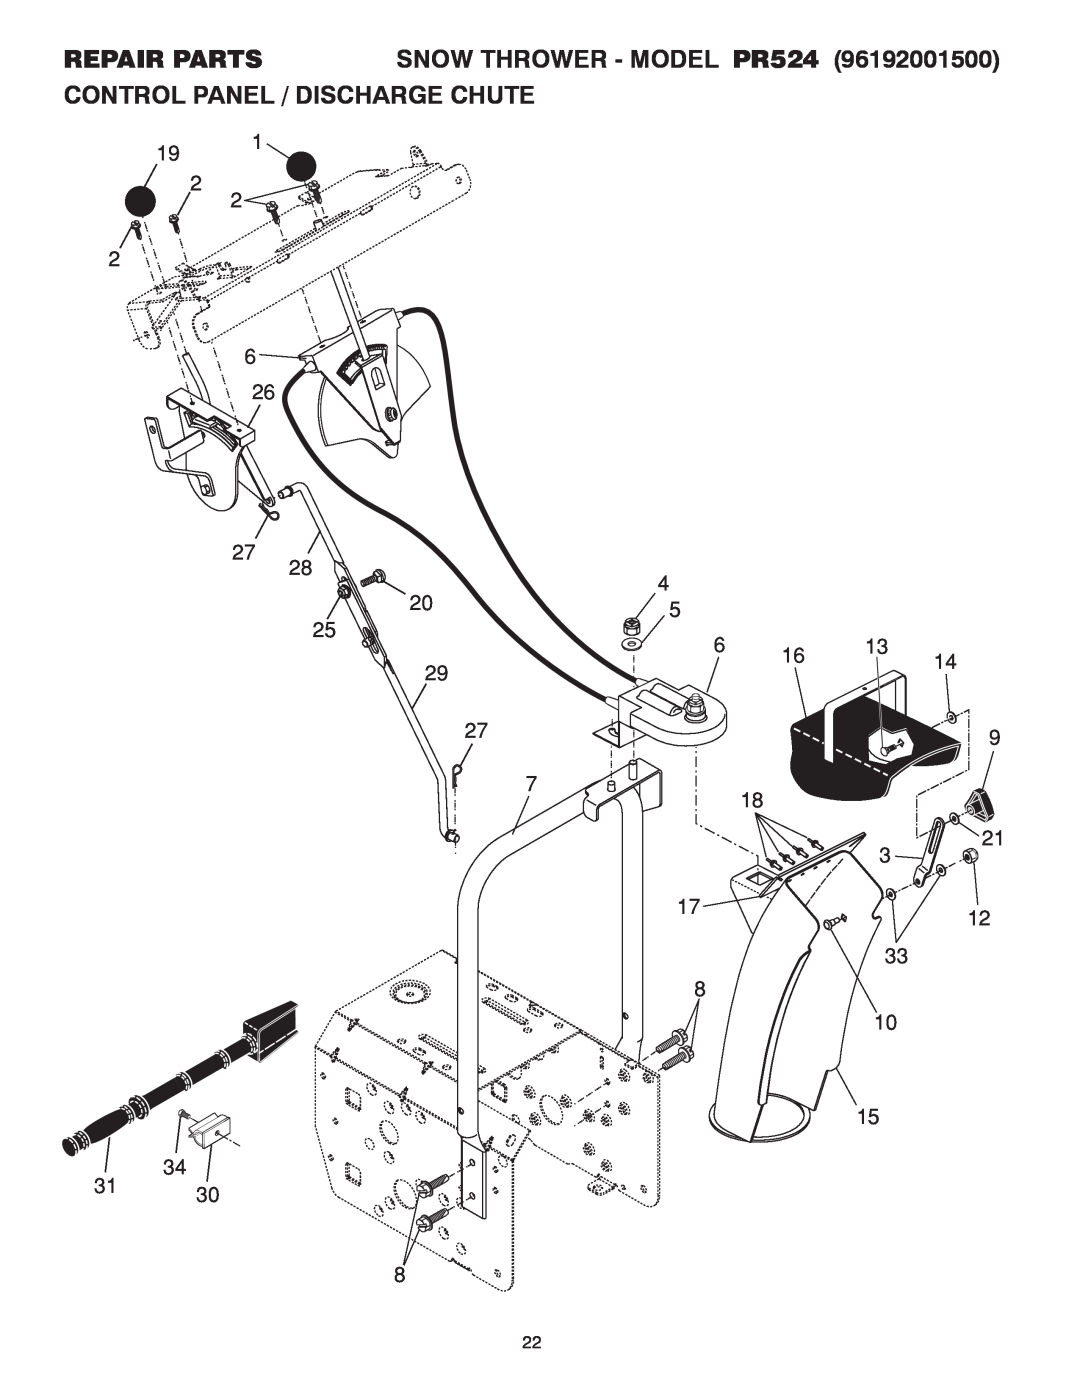 Poulan 414639 owner manual REPAIR PARTS SNOW THROWER - MODEL PR524, Control Panel / Discharge Chute 